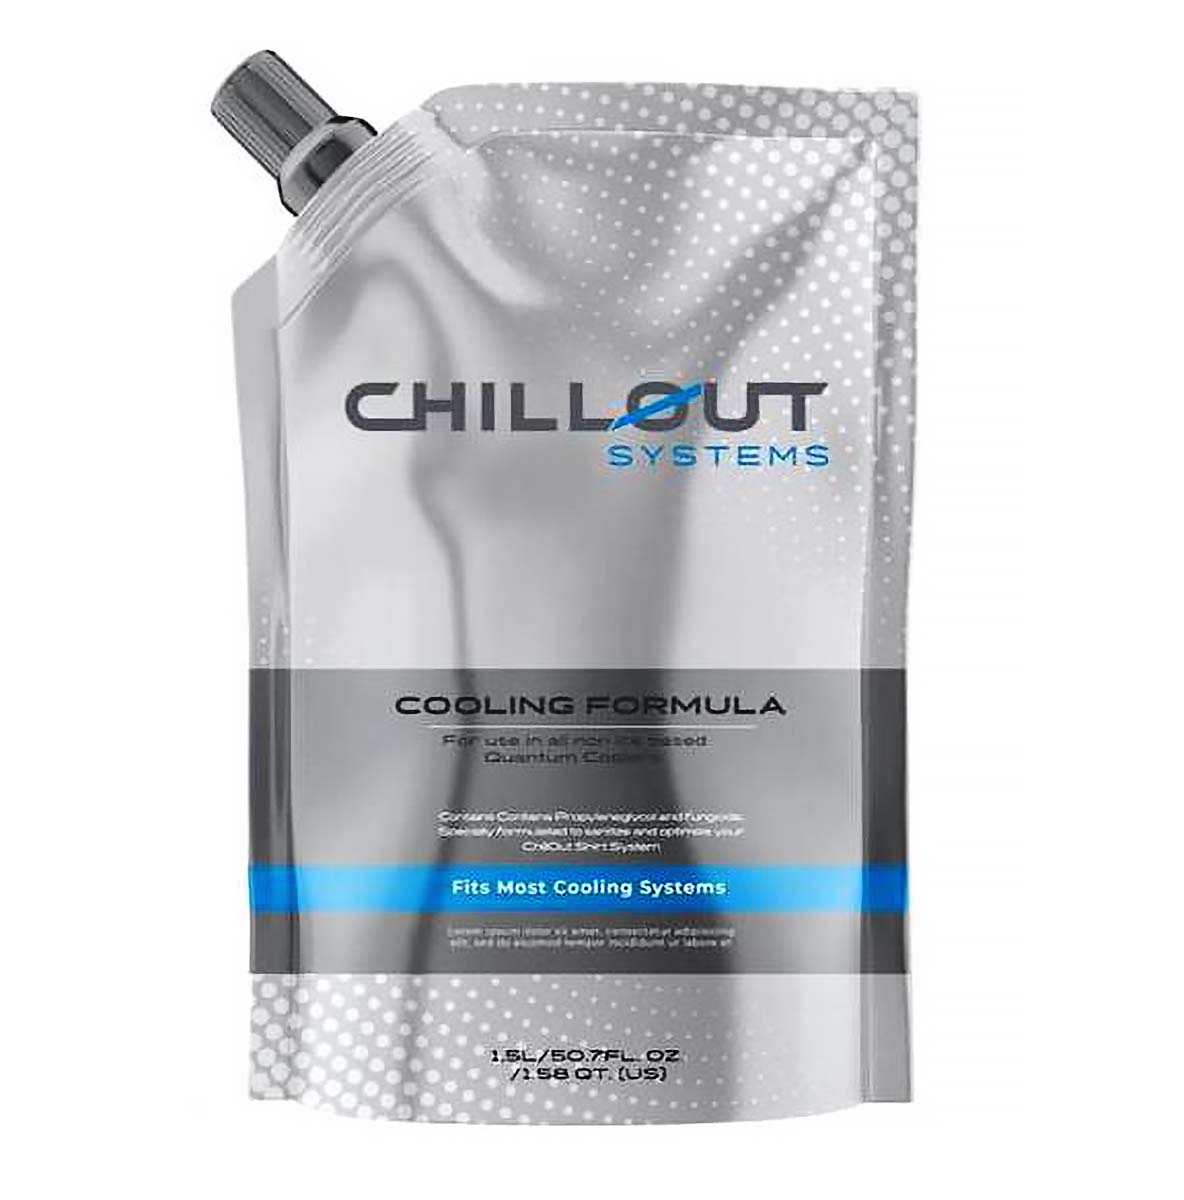 Chillout Systems 1.5 Liter Coolant Formula